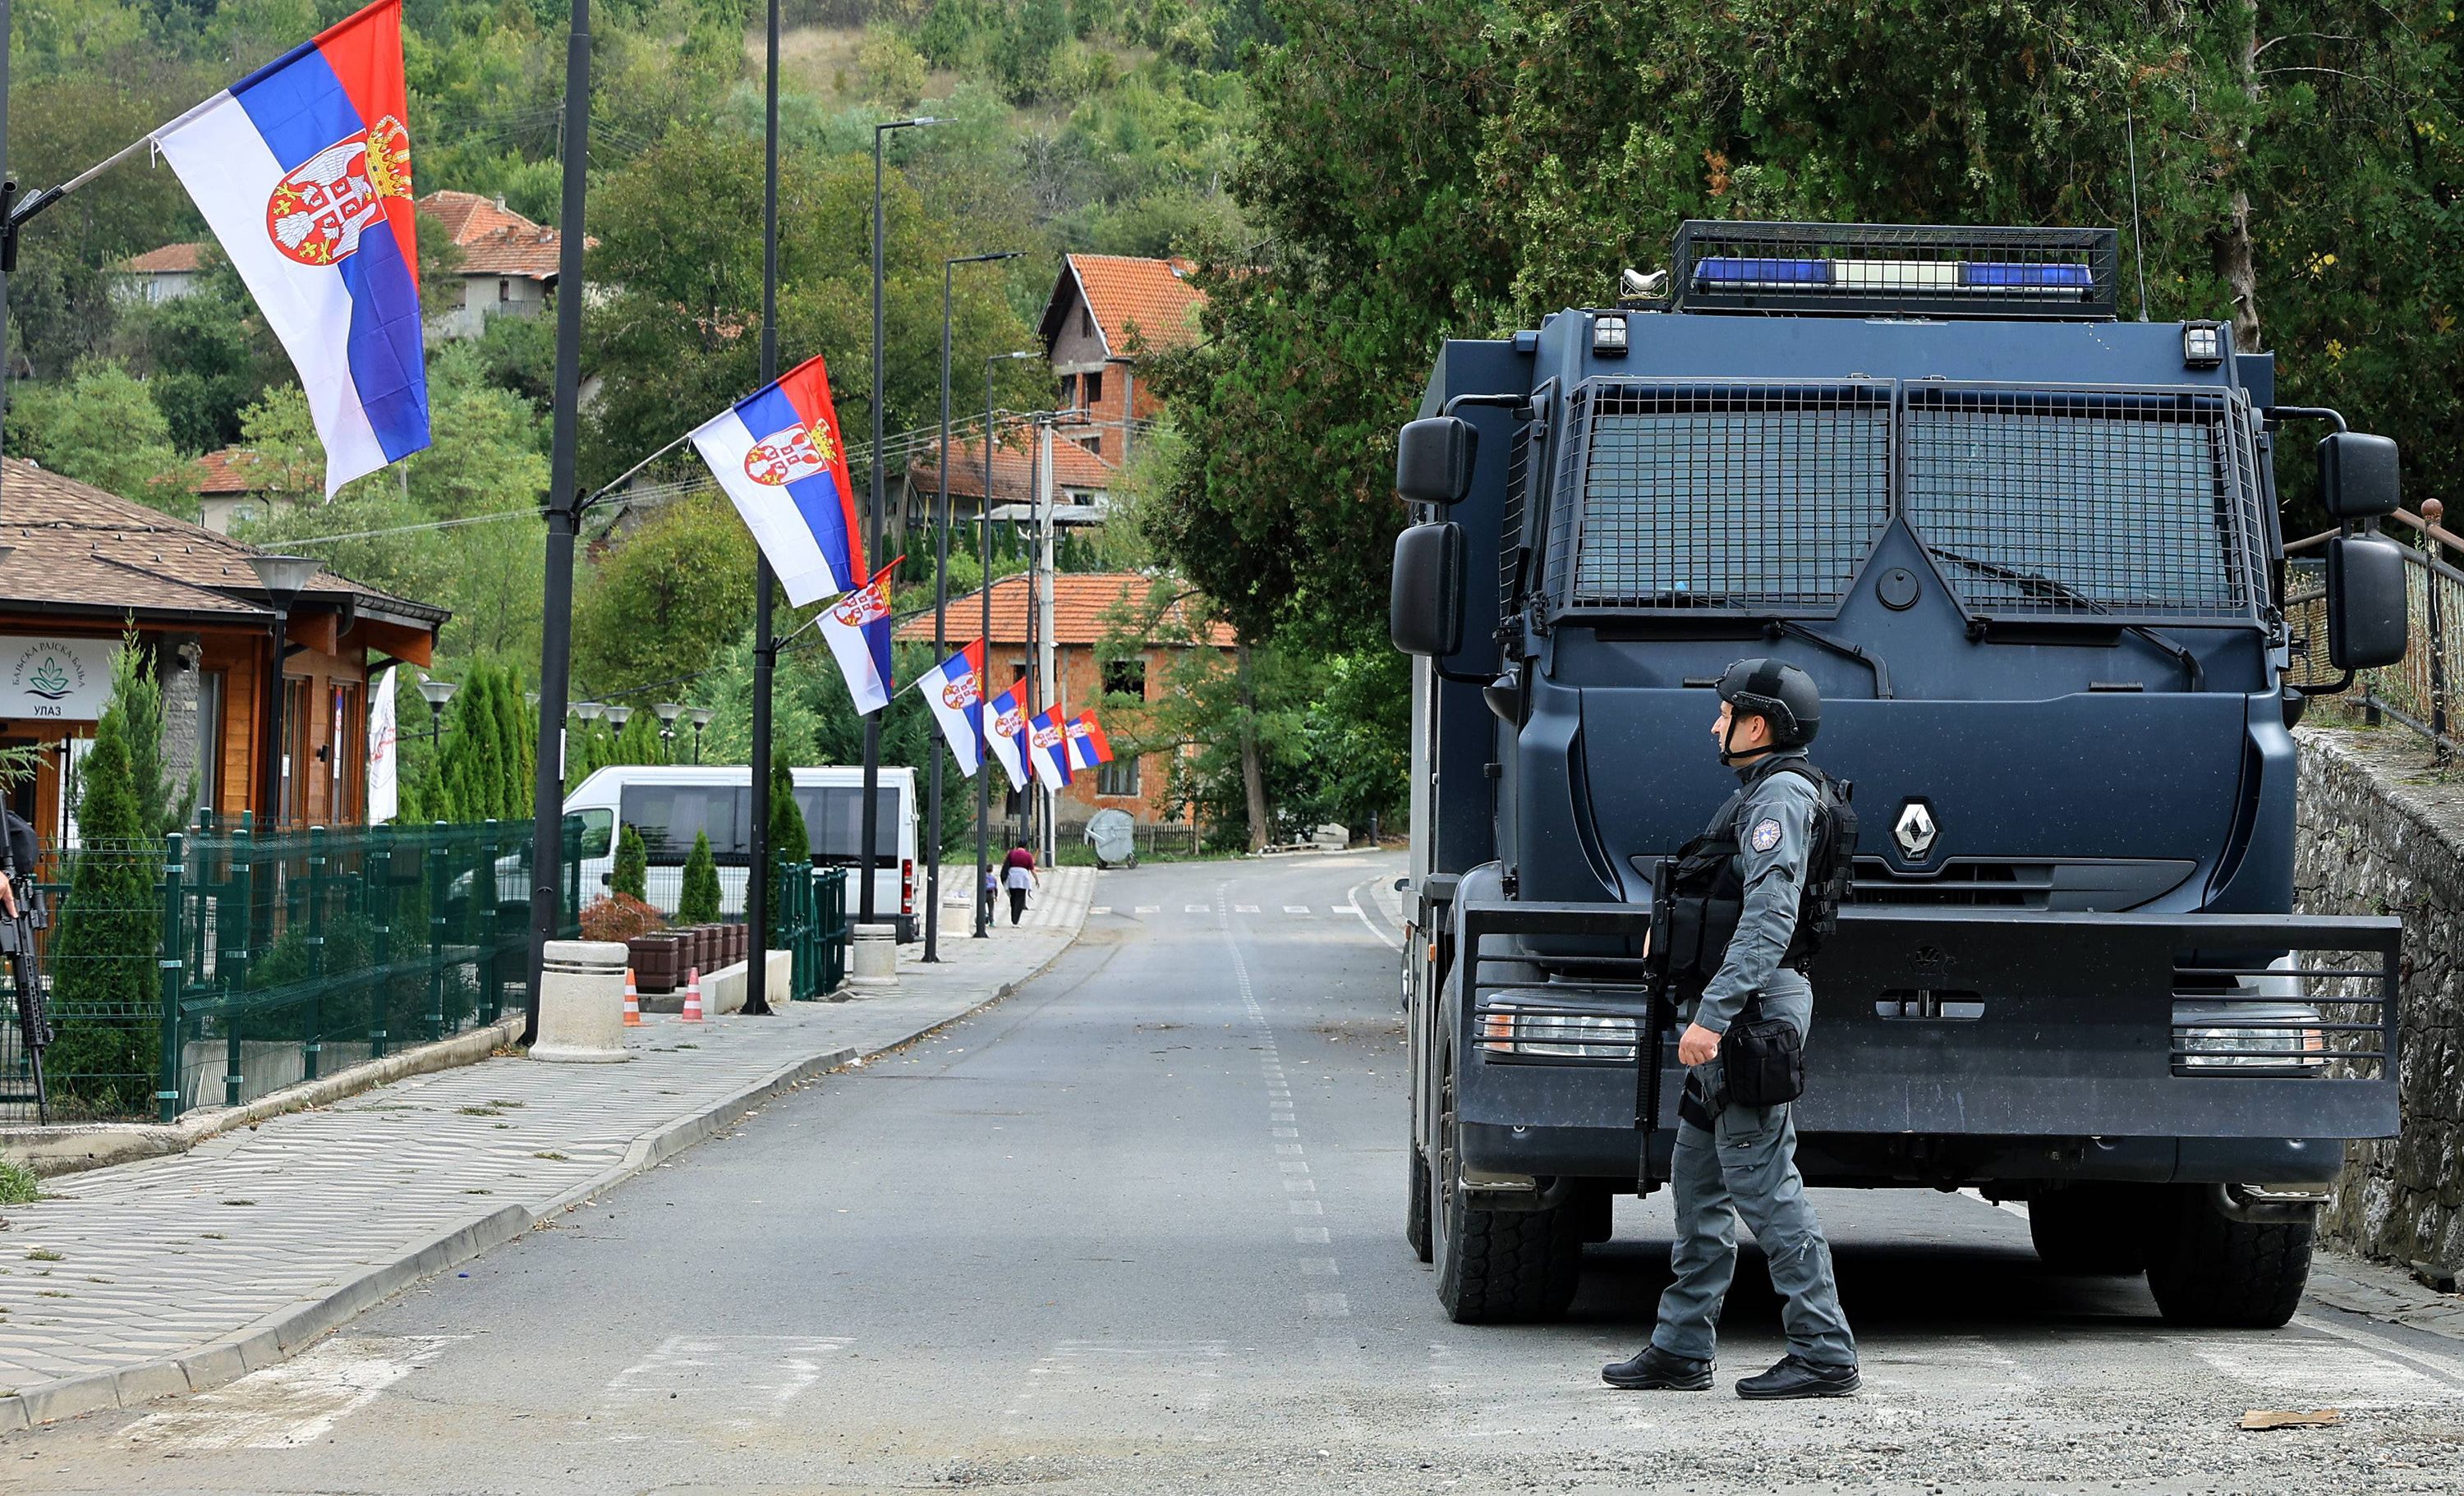 Heavy police forces and armored vehicles present in the village of Banjska in Kosovo.